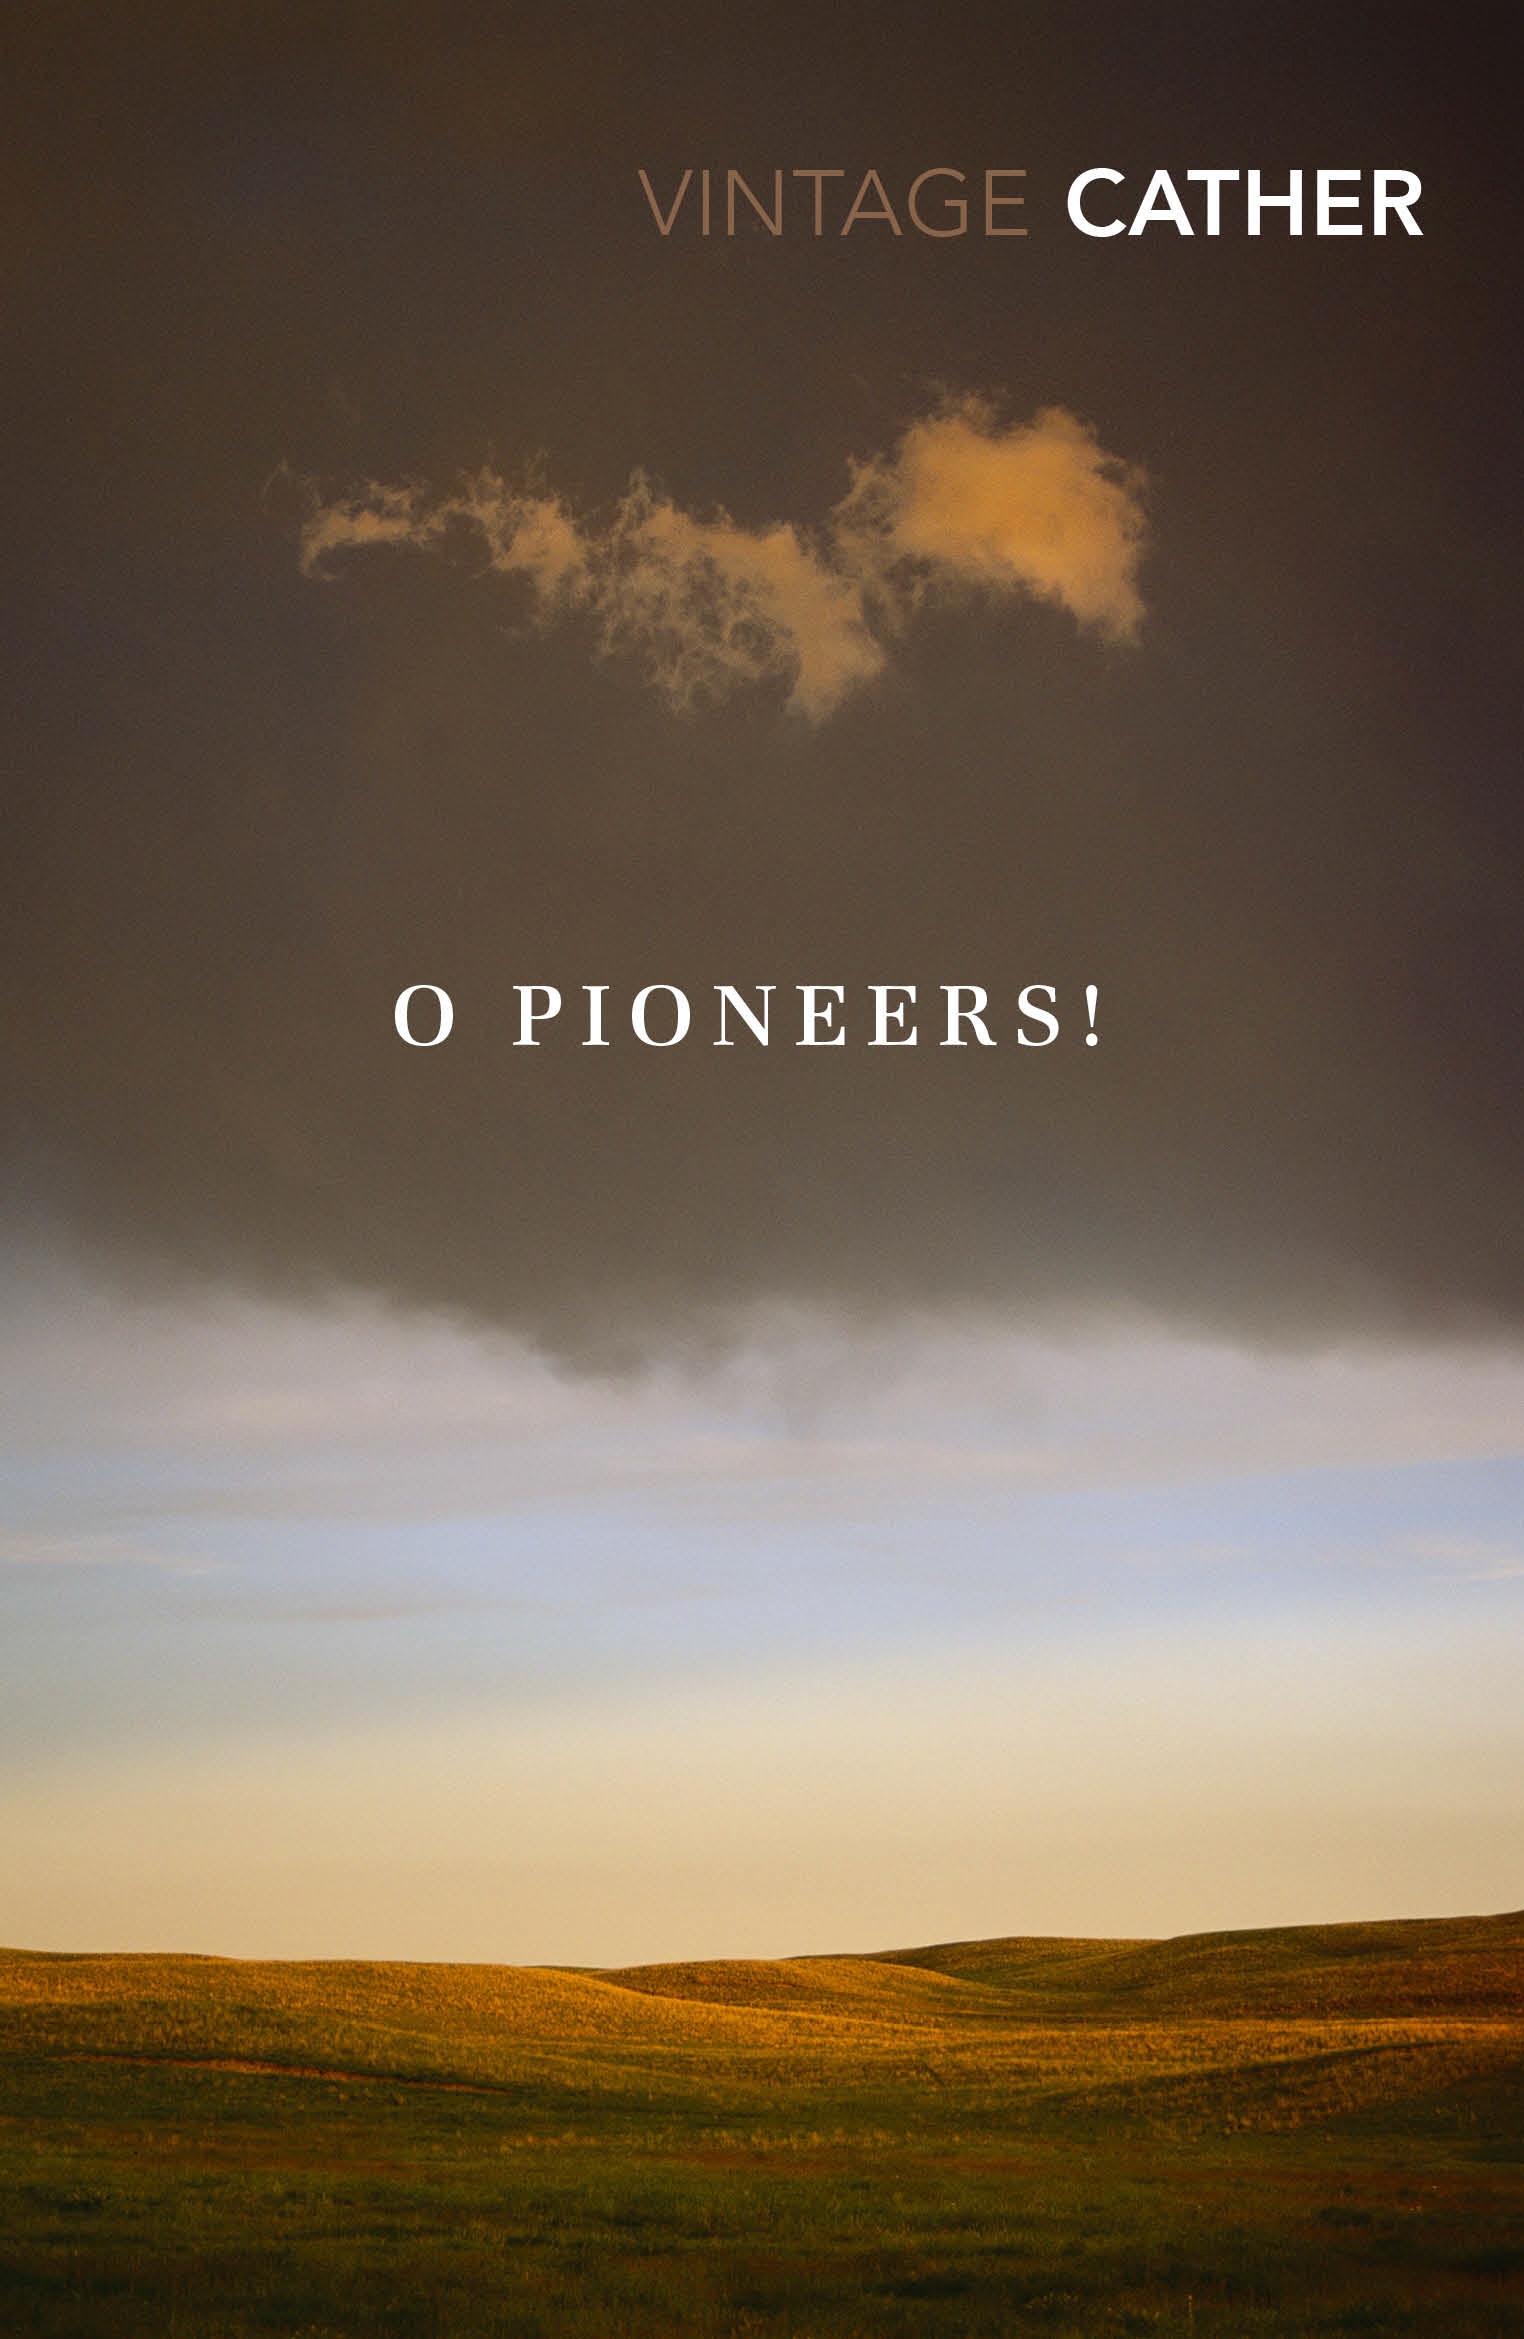 Book “O Pioneers!” by Willa Cather — September 5, 2019